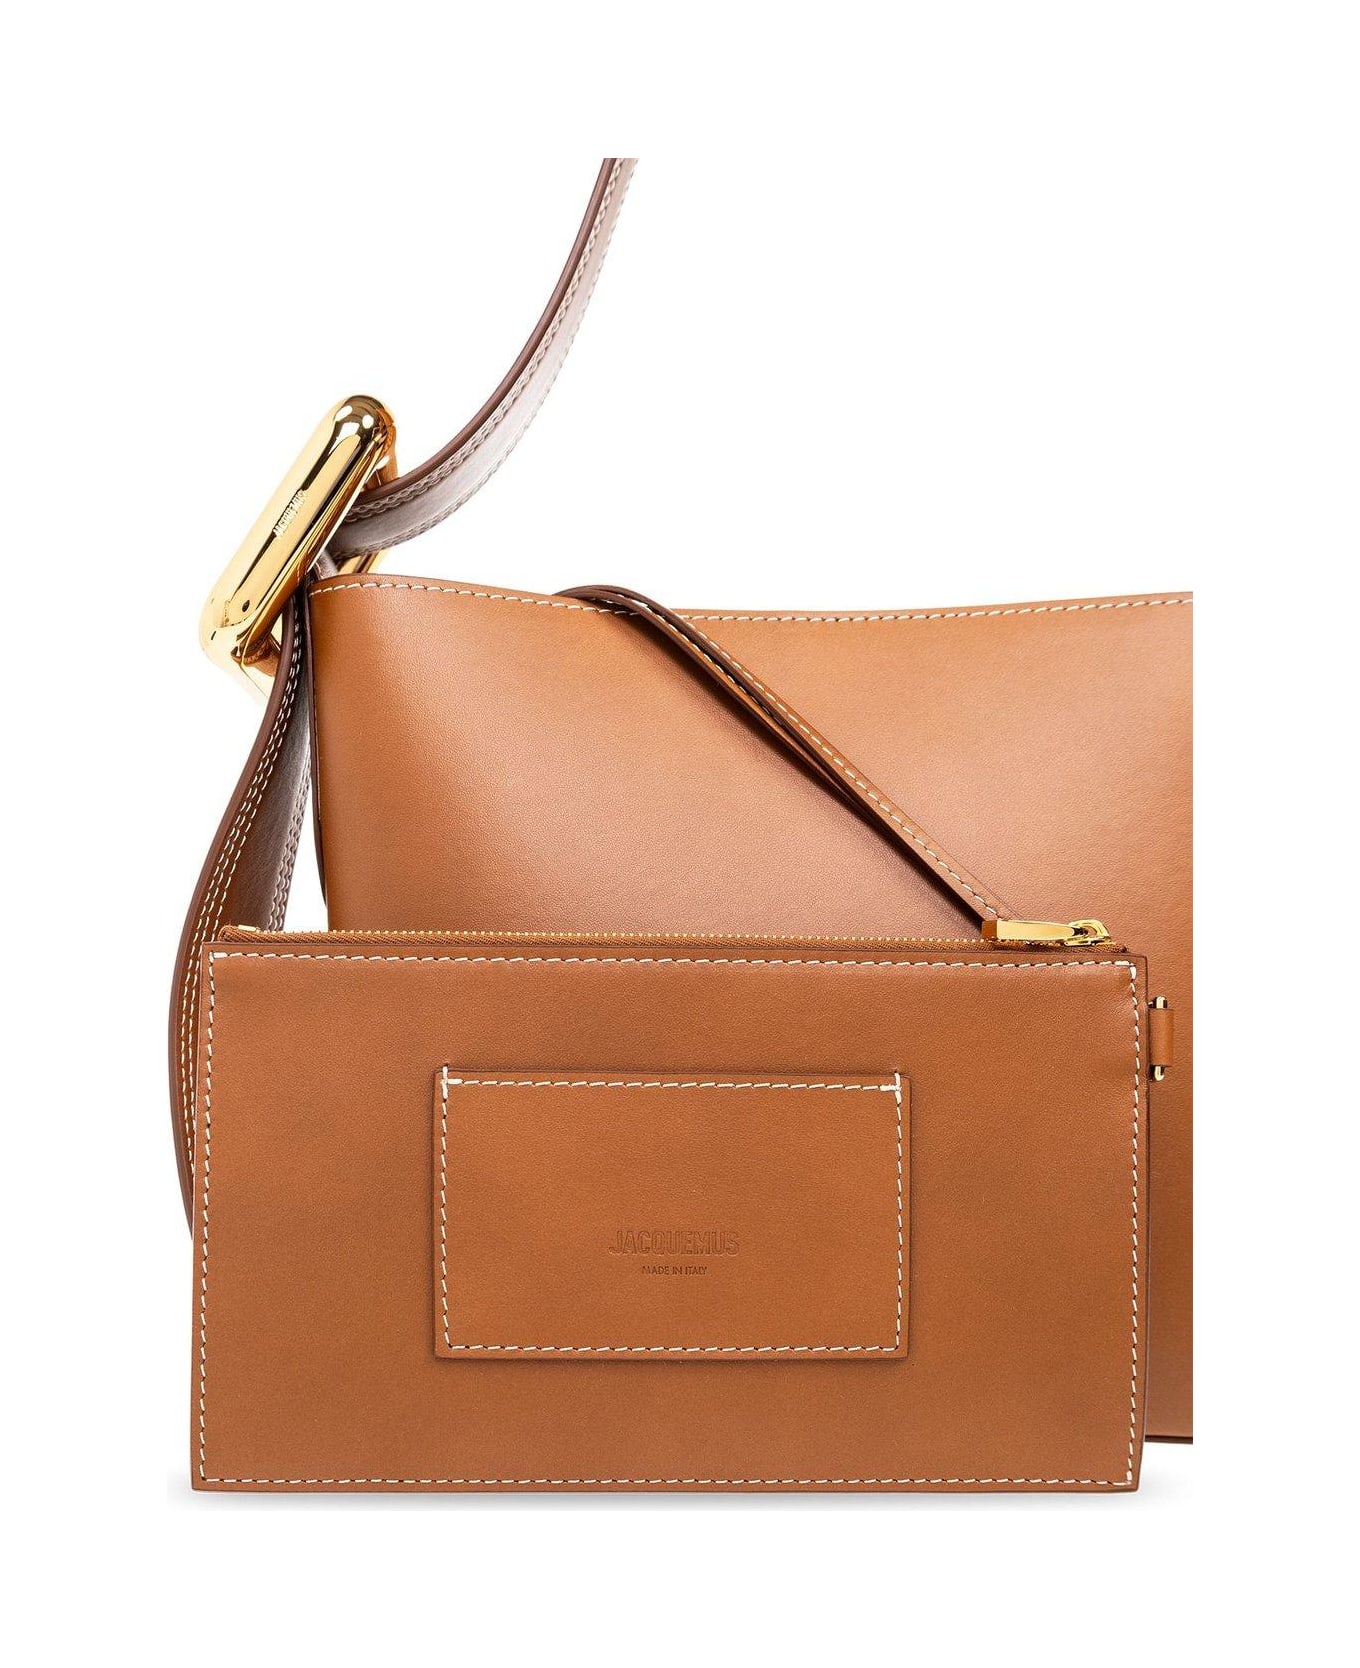 Jacquemus Buckled Small Bucket Bag - Leather Brown